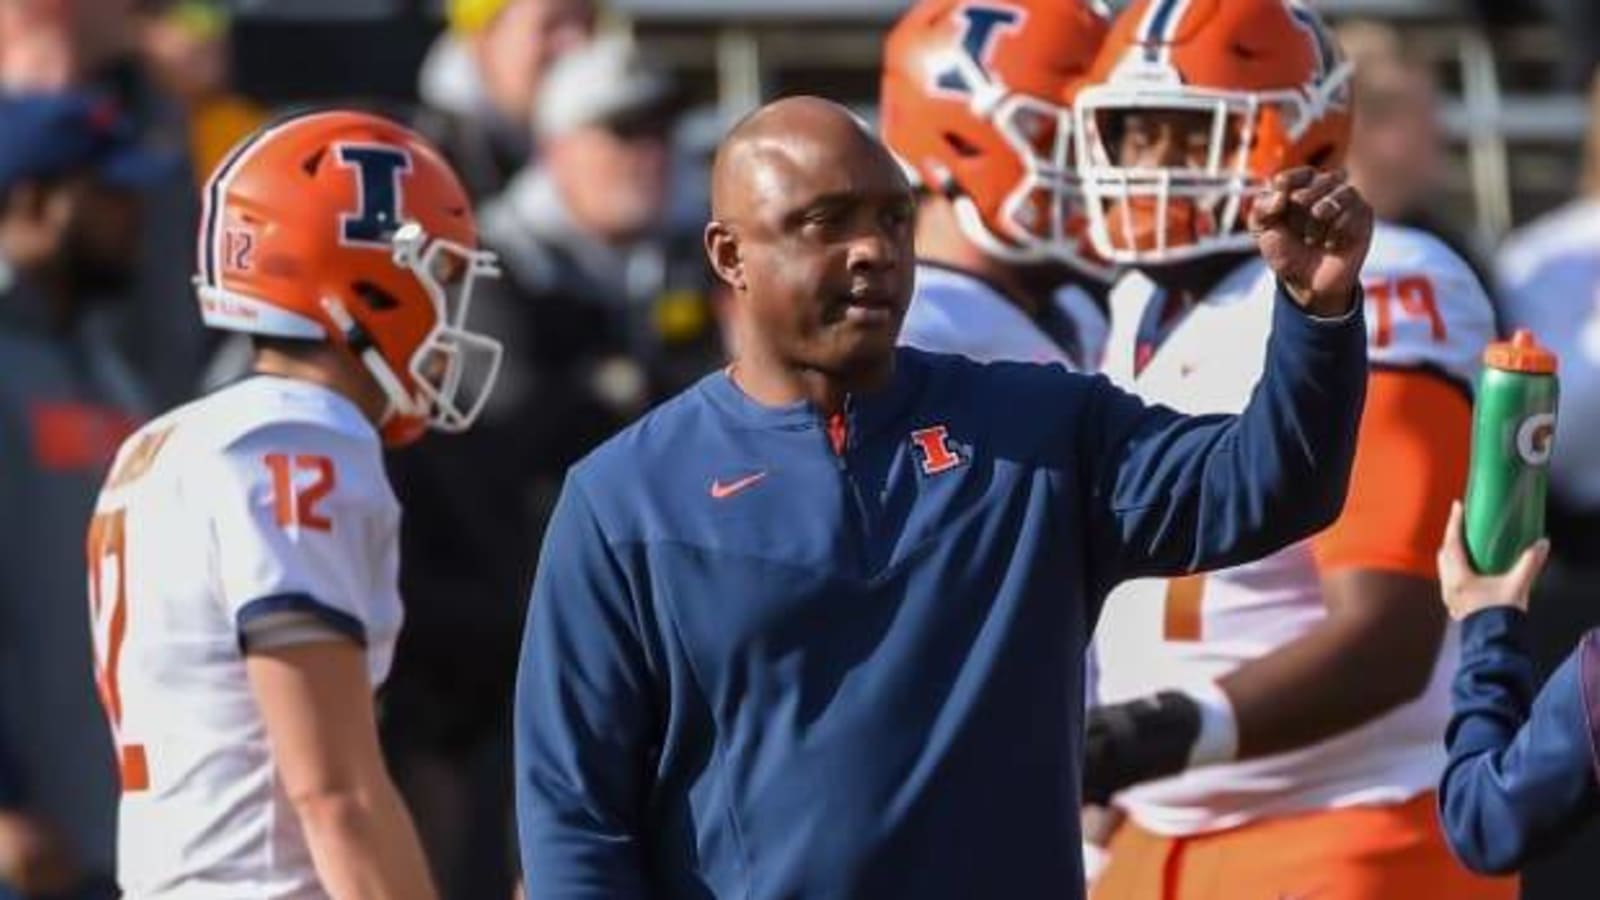 Rebels Officially Announce Hire of McDonald, Cox to Football Coaching Staff